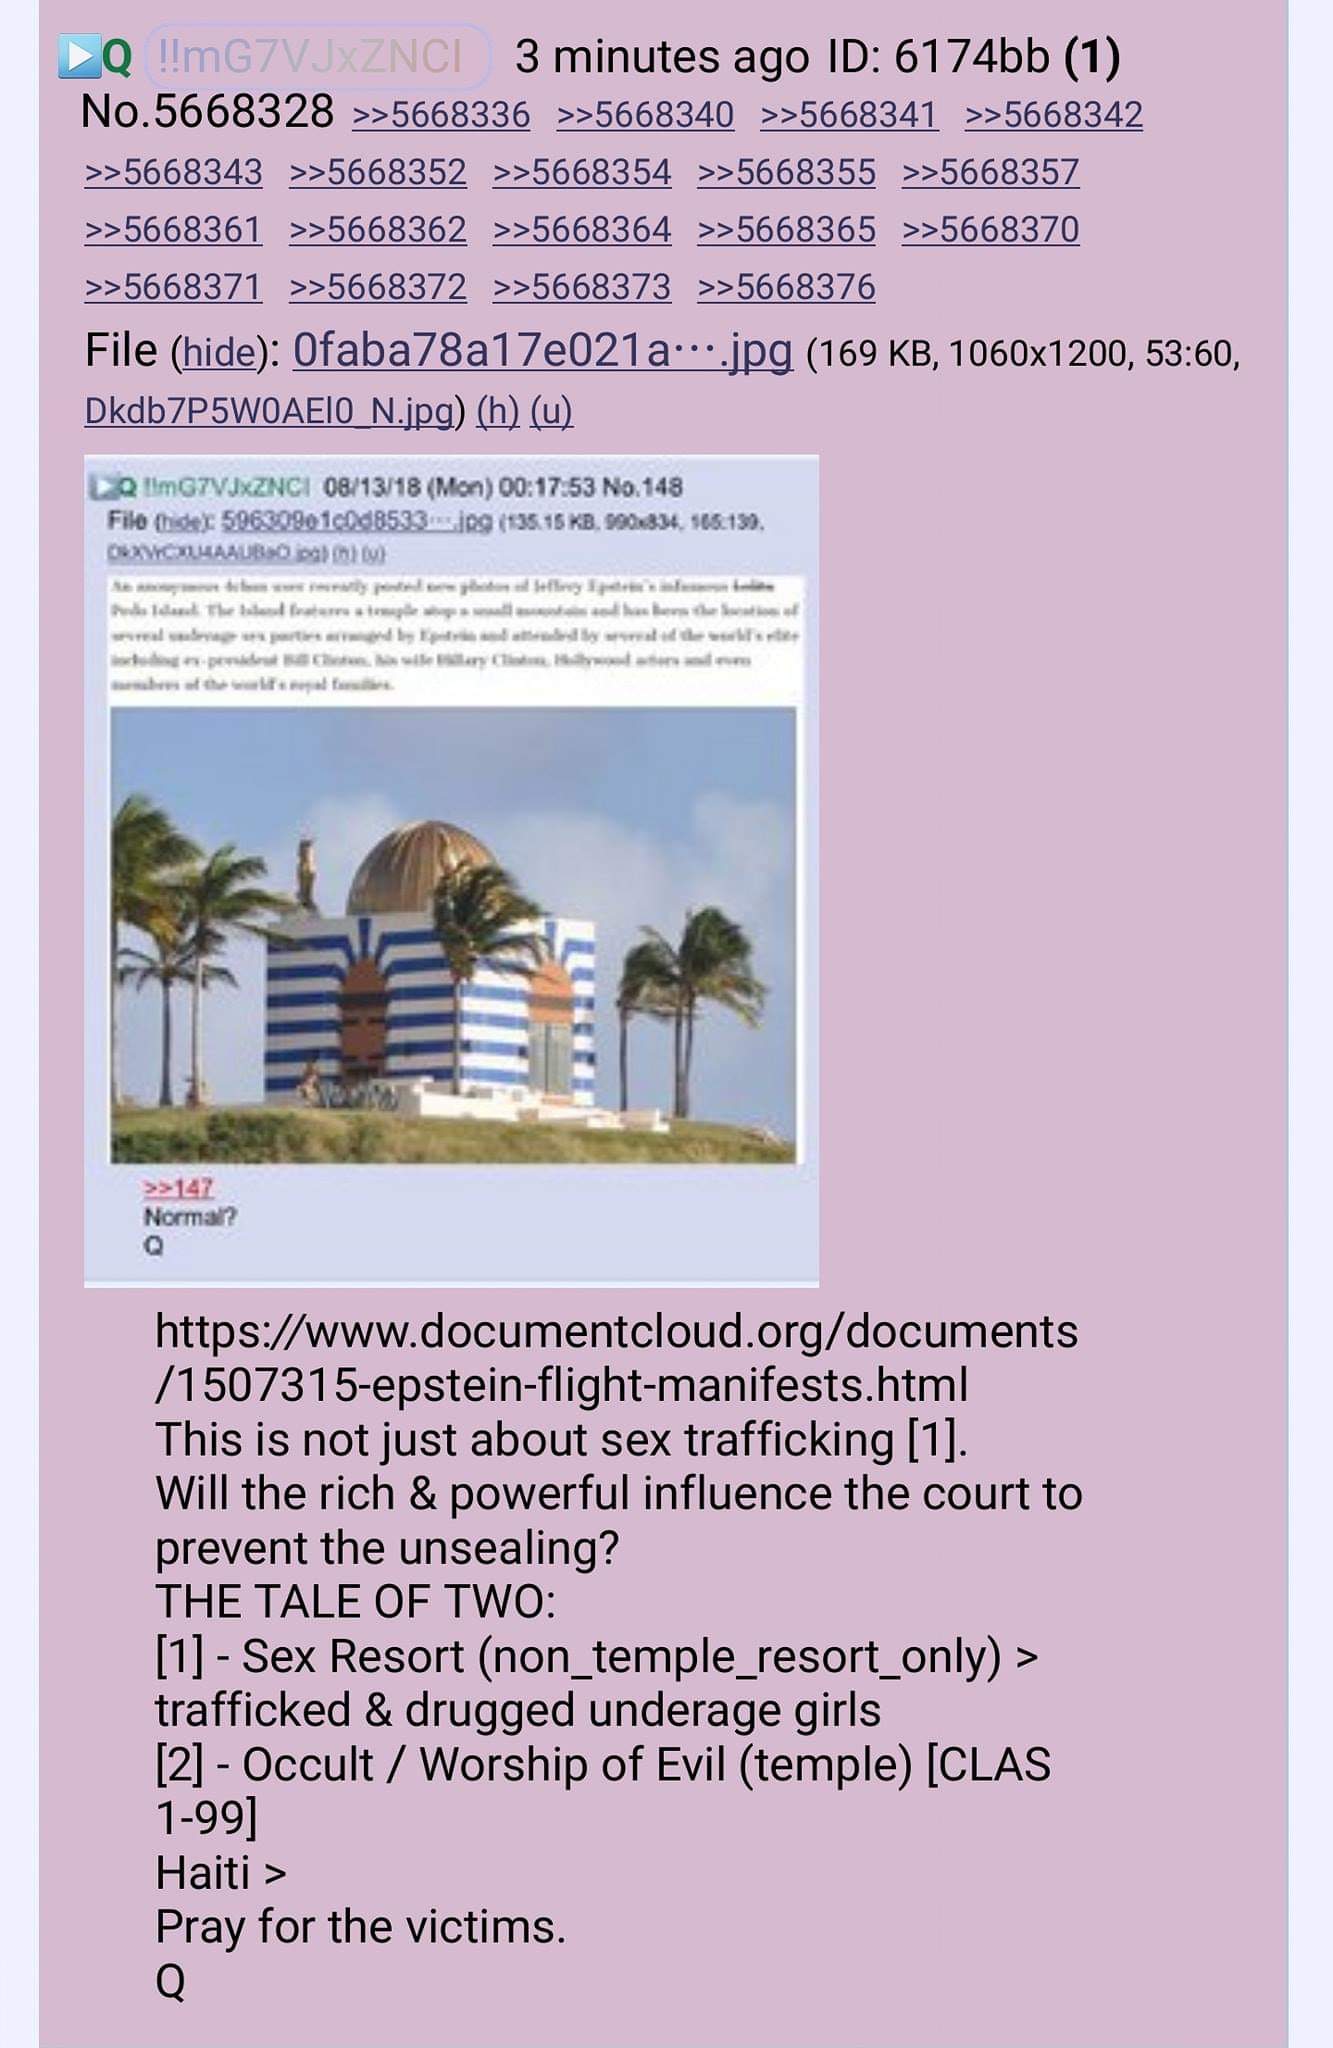 QPost - #3050 https://www.documentcloud.org/documents/1507315-epstein-flight-manifests.html  This is not just about sex trafficking [1].  Will the rich & powerful influence the court to prevent the unsealing?  THE TALE OF TWO:  [1] - Sex Resort (non_temple_resort_only) > trafficked & drugged underage girls  [2] - Occult / Worship of Evil (temple) [CLAS 1-99]  Haiti >   Pray for the victims.   Q https://8ch.net/qresearch/res/5663975.html#5664805